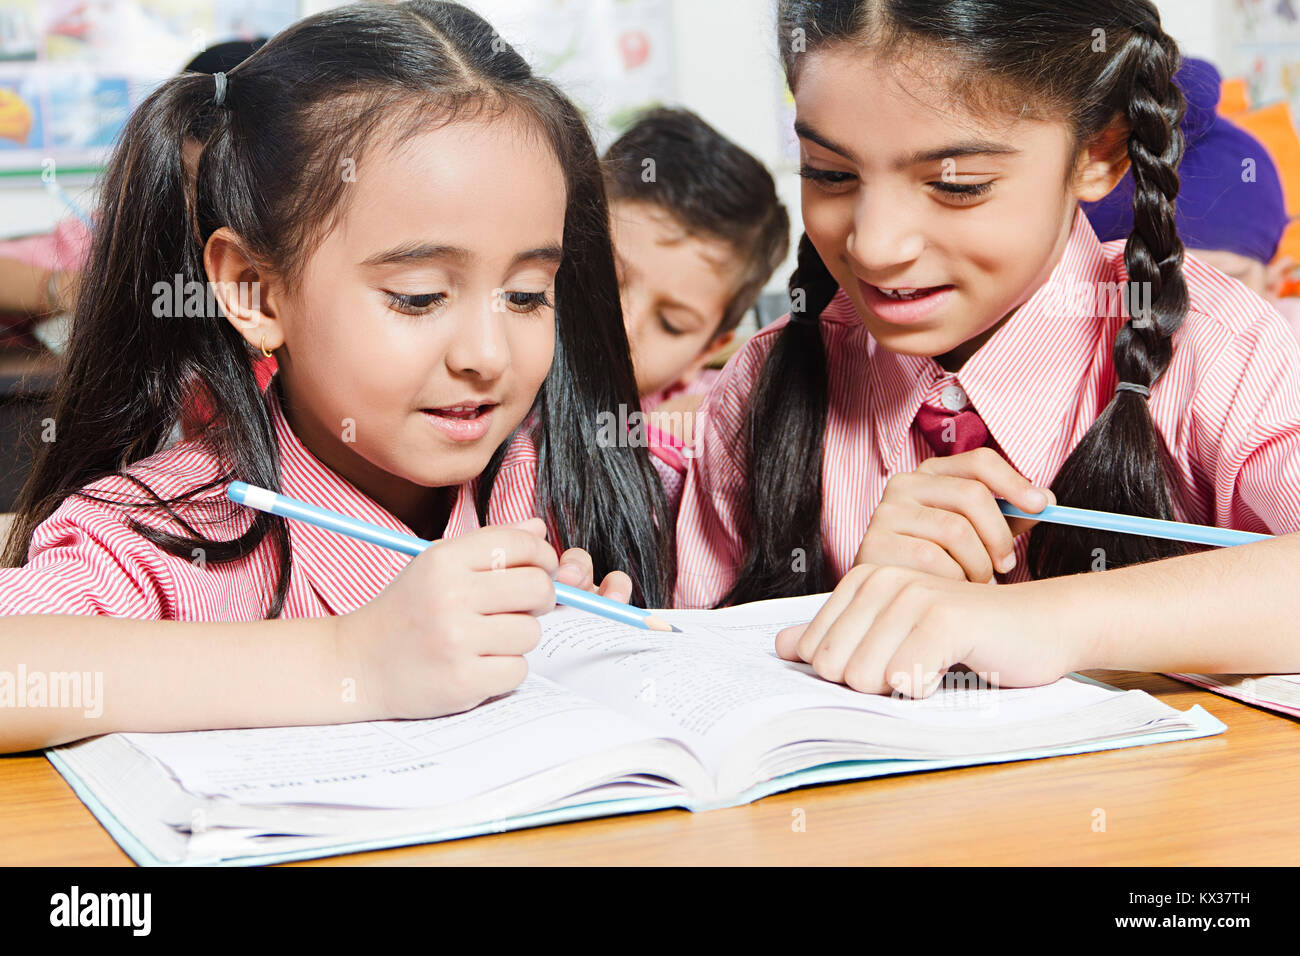 2 Indian School Kids Students Girls Book Studying In Class Stock Photo